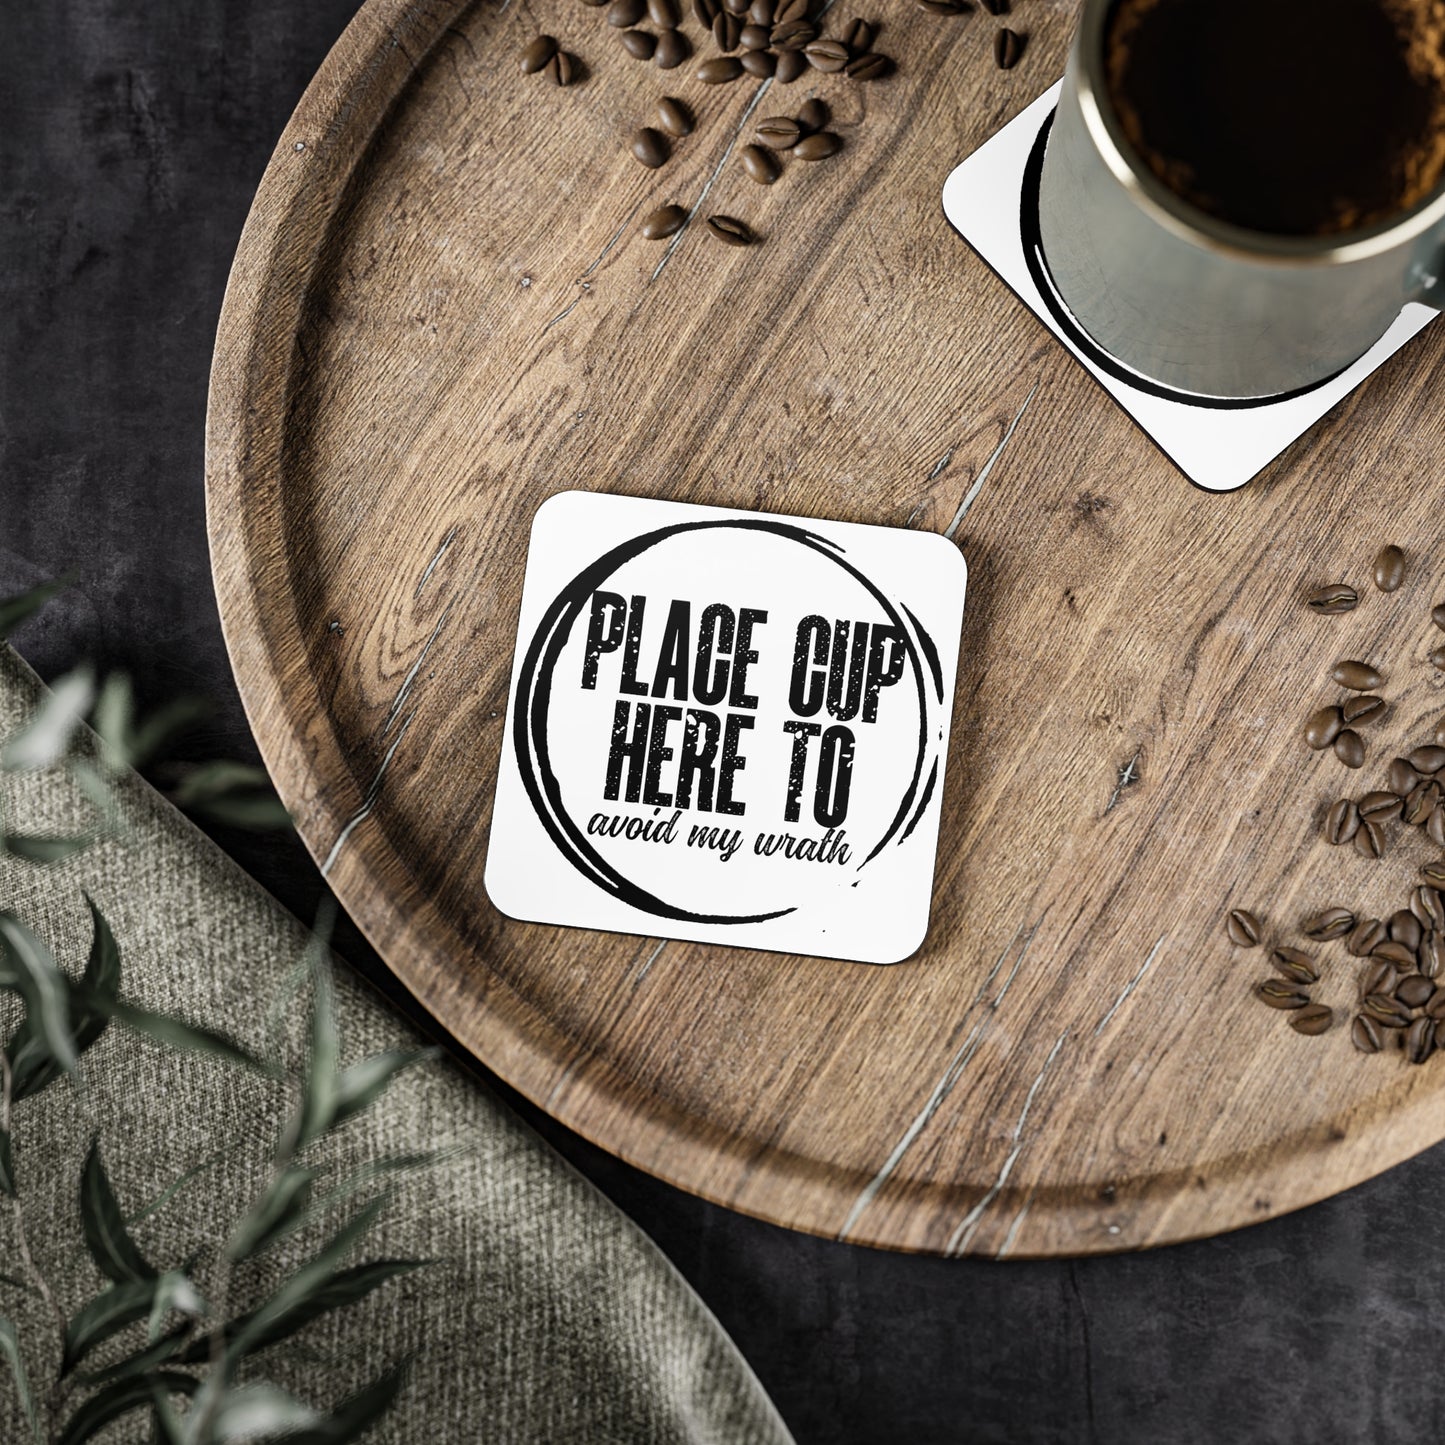 "Place Cup Here To Avoid My Wrath" Square Coasters